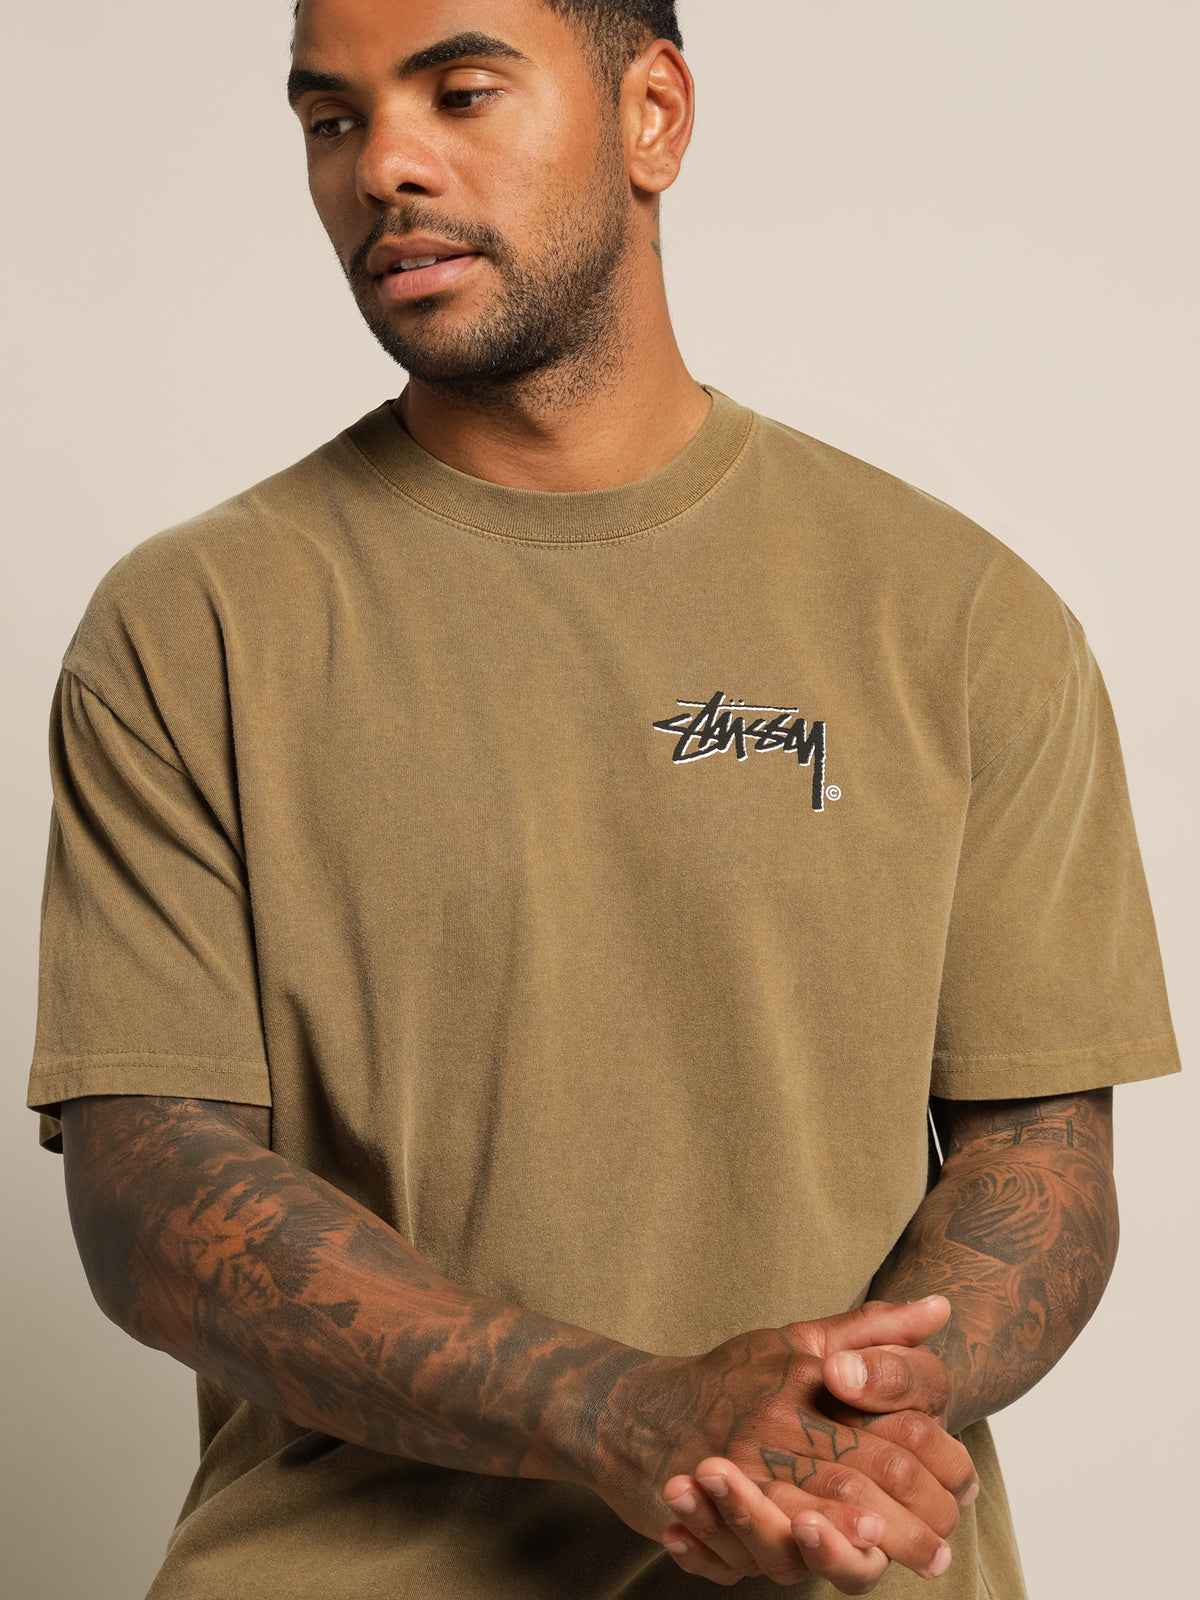 Shadow Stock T-Shirt in Tobacco Brown